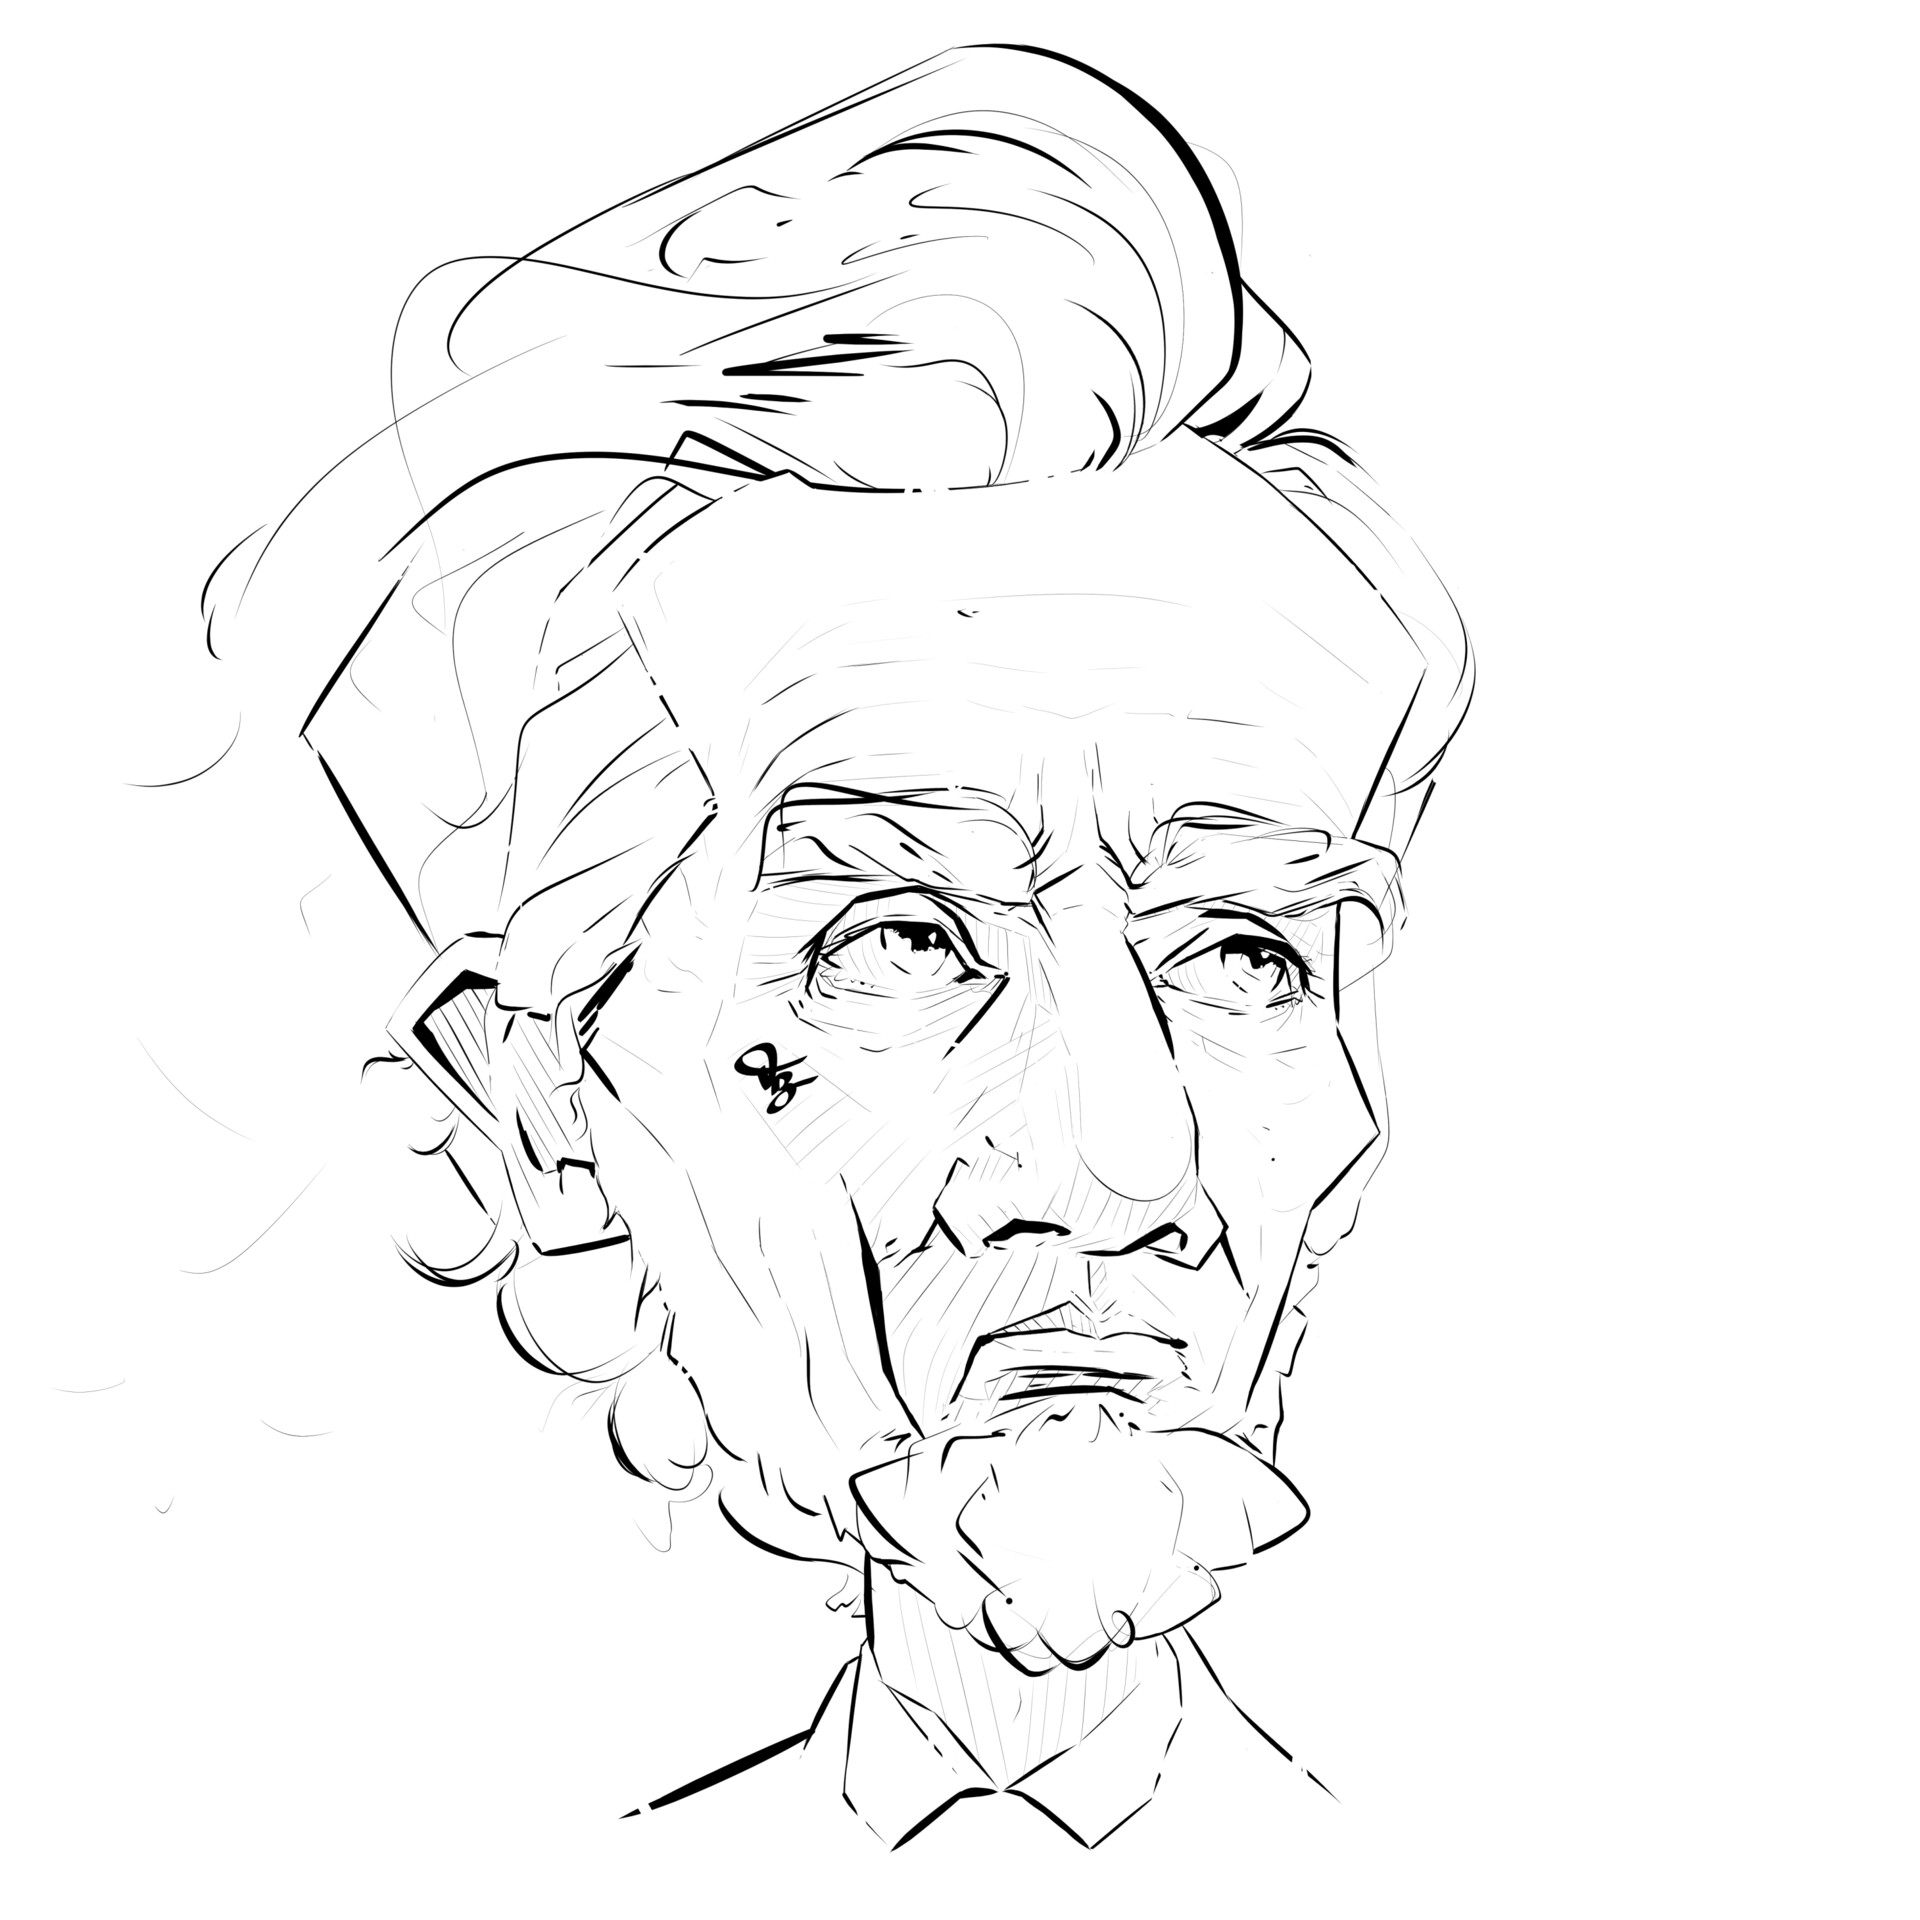 abraham lincoln drawing face